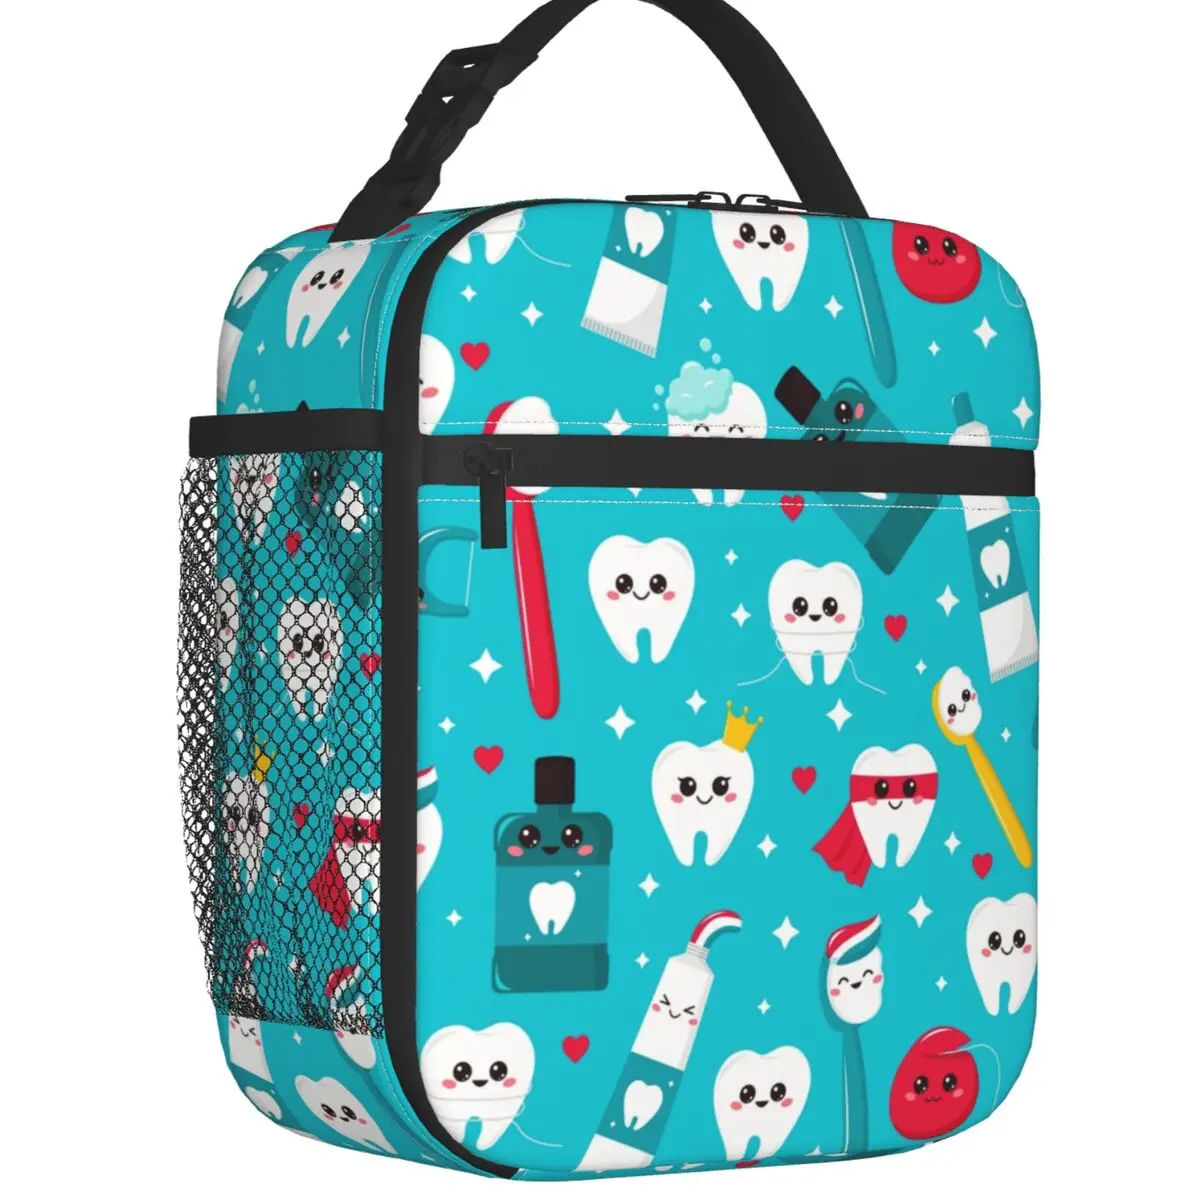 

Dentist Cartoon Pattern Insulated Lunch Bag for Women Leakproof Tooth Medical Cooler Thermal Bento Box Office Work School